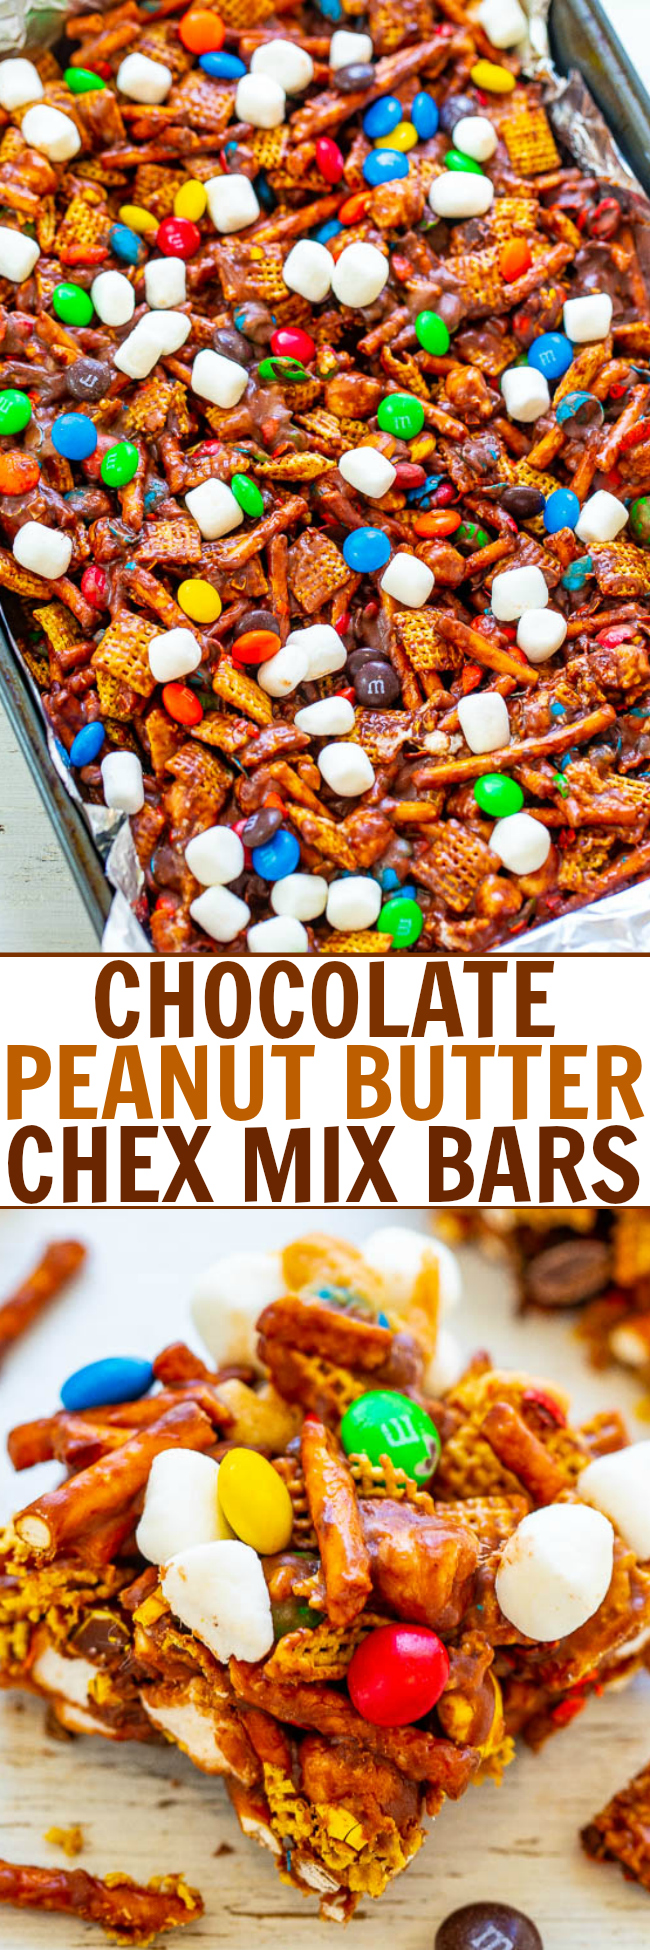 Chocolate Peanut Butter Chex Bars — SO EASY, NO-BAKE, and ready in FIVE minutes!! Chex cereal, pretzels, and M&Ms glued together with peanut butter and marshmallows!! An IRRESISTIBLE salty-sweet combination!!